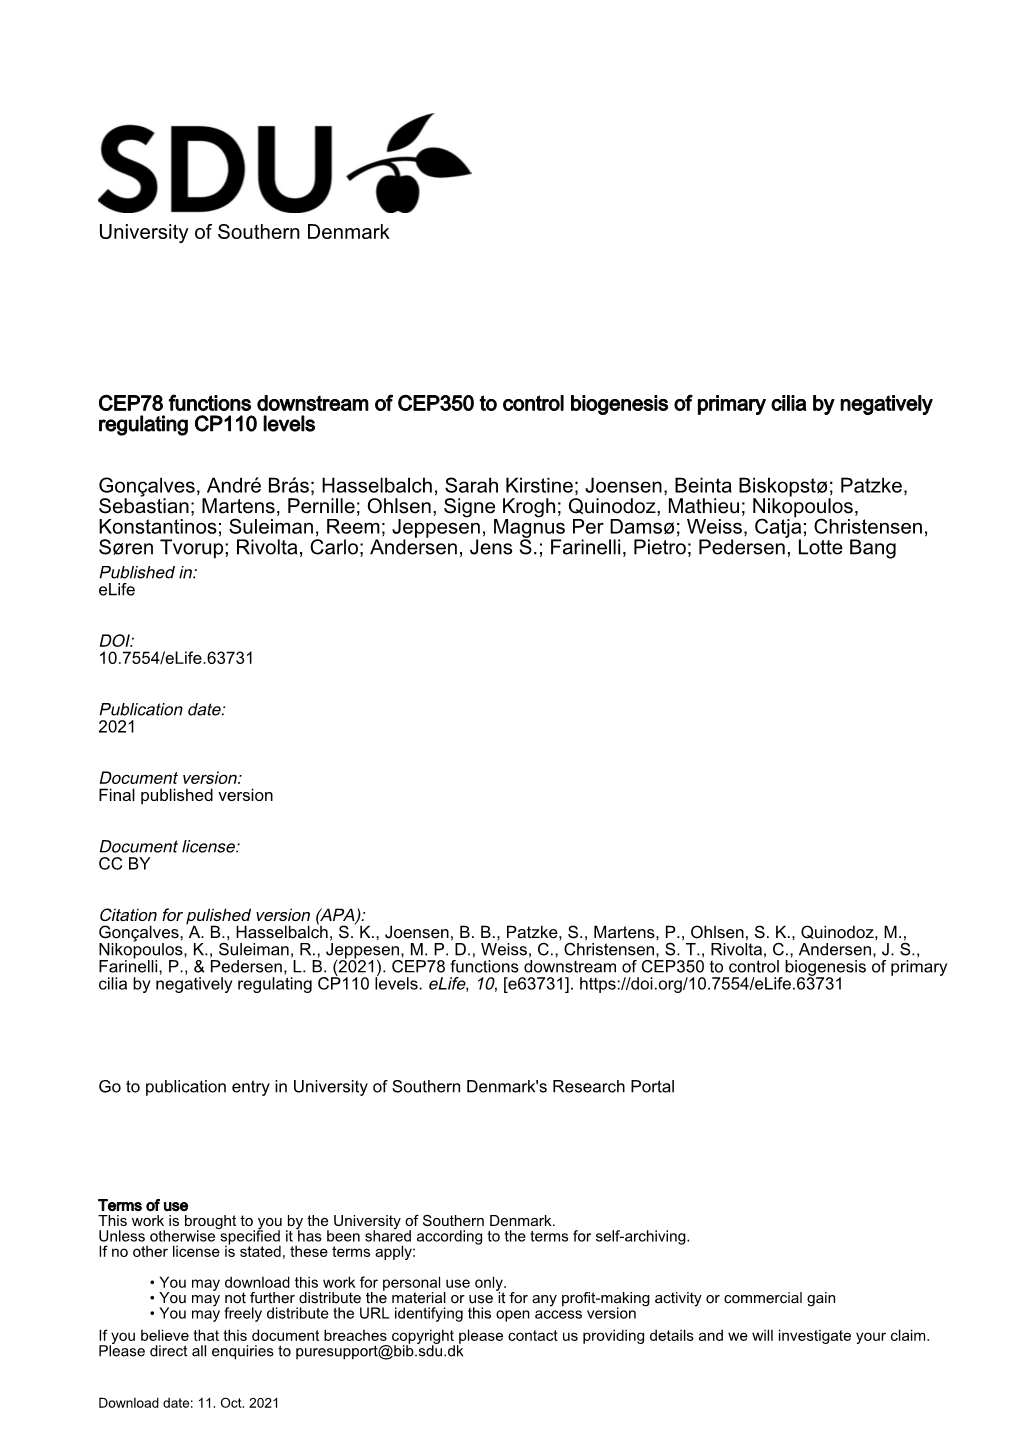 University of Southern Denmark CEP78 Functions Downstream Of